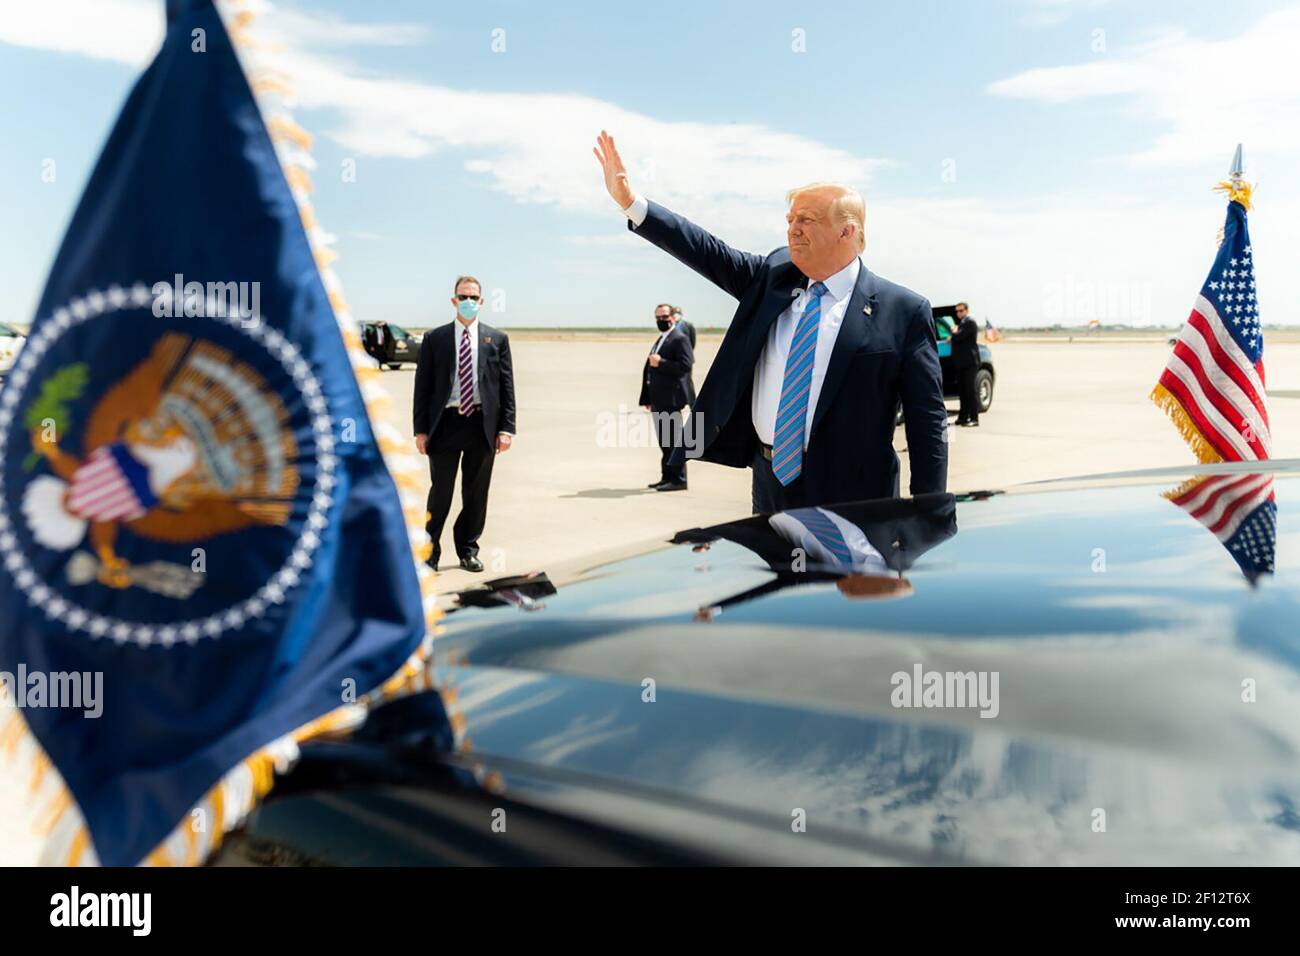 President Donald Trump waves and gestures to the crowd upon his arrival to Midland International Air and Space Port in Midland Texas Wednesday July 29 2020 where he was greeted by Texas Gov. Greg Abbott former Secretary of Energy Rick Perry Texas Lt.Gov. Dan Patrick Texas Republican Chairman Allen West U.S. Representative candidates and members of the community. Stock Photo